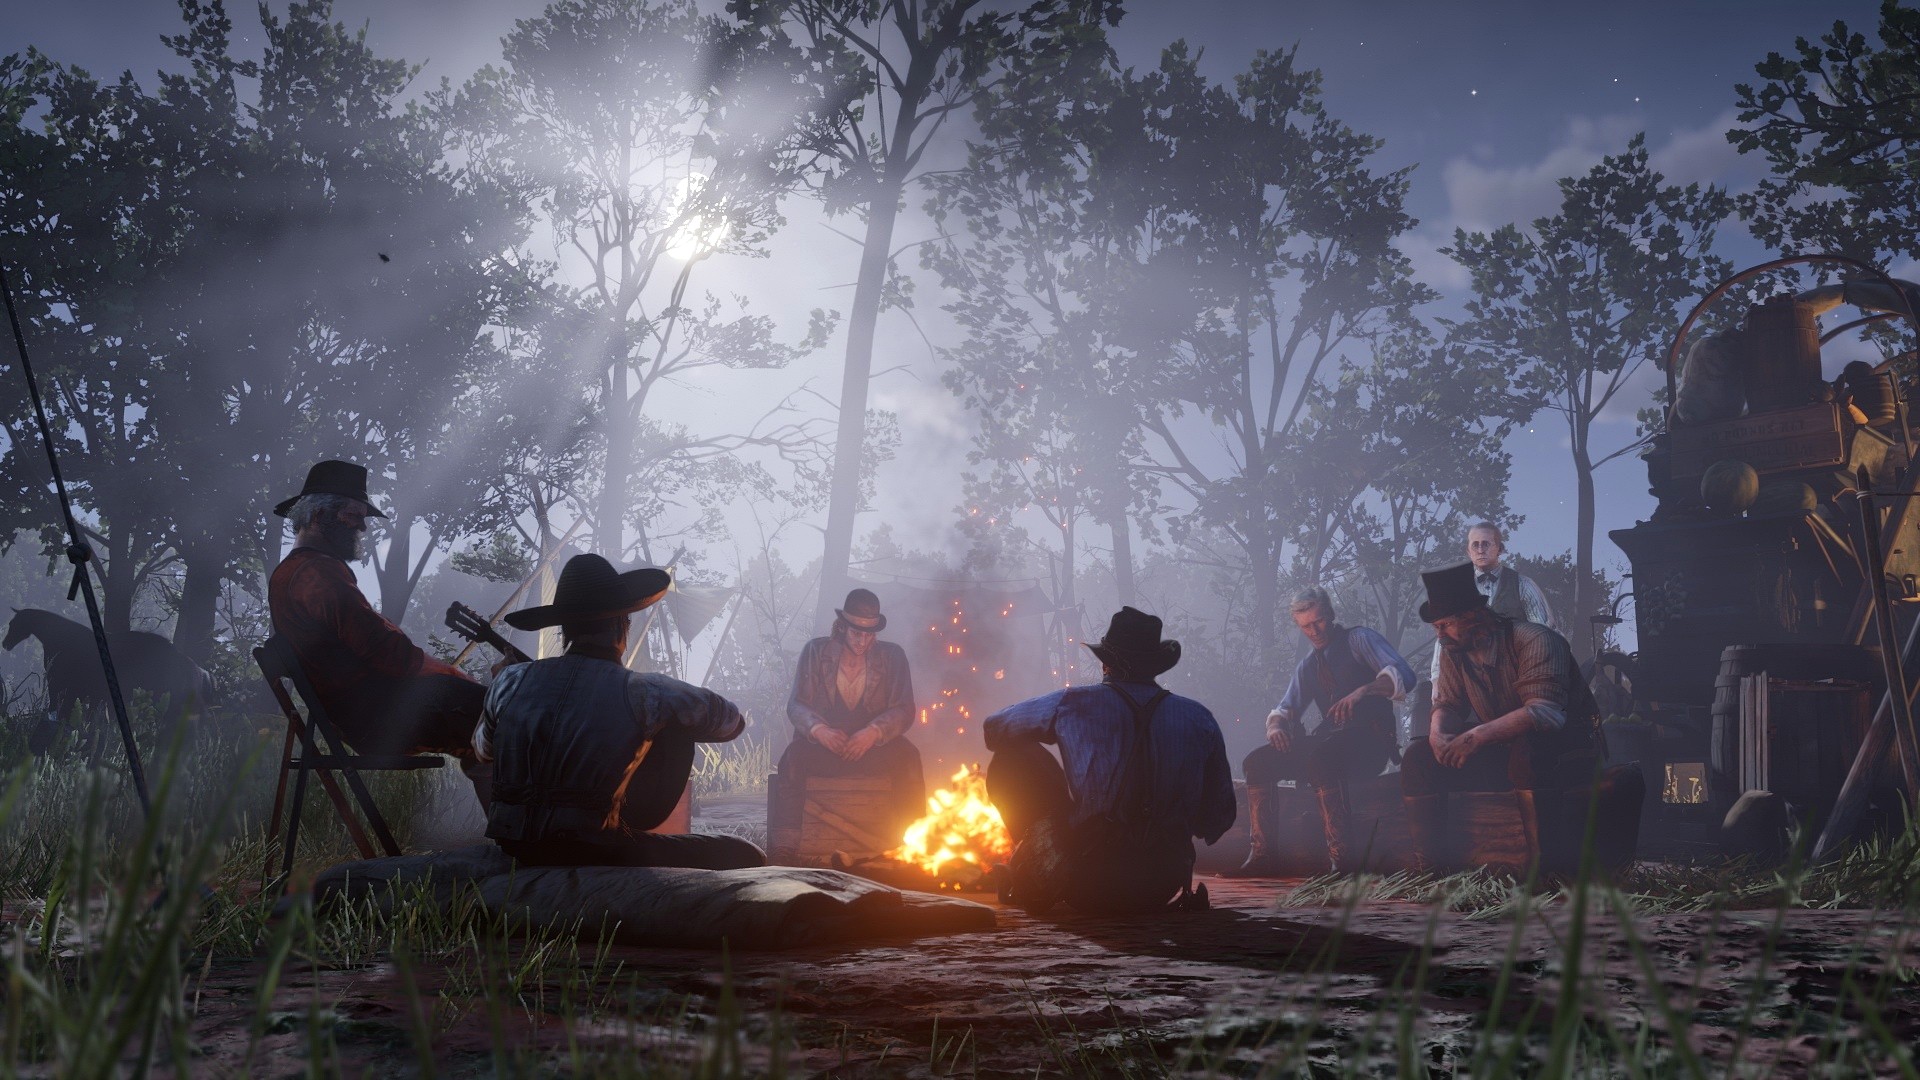 Rockstar knows how to create atmospheric landscapes, as seen here.